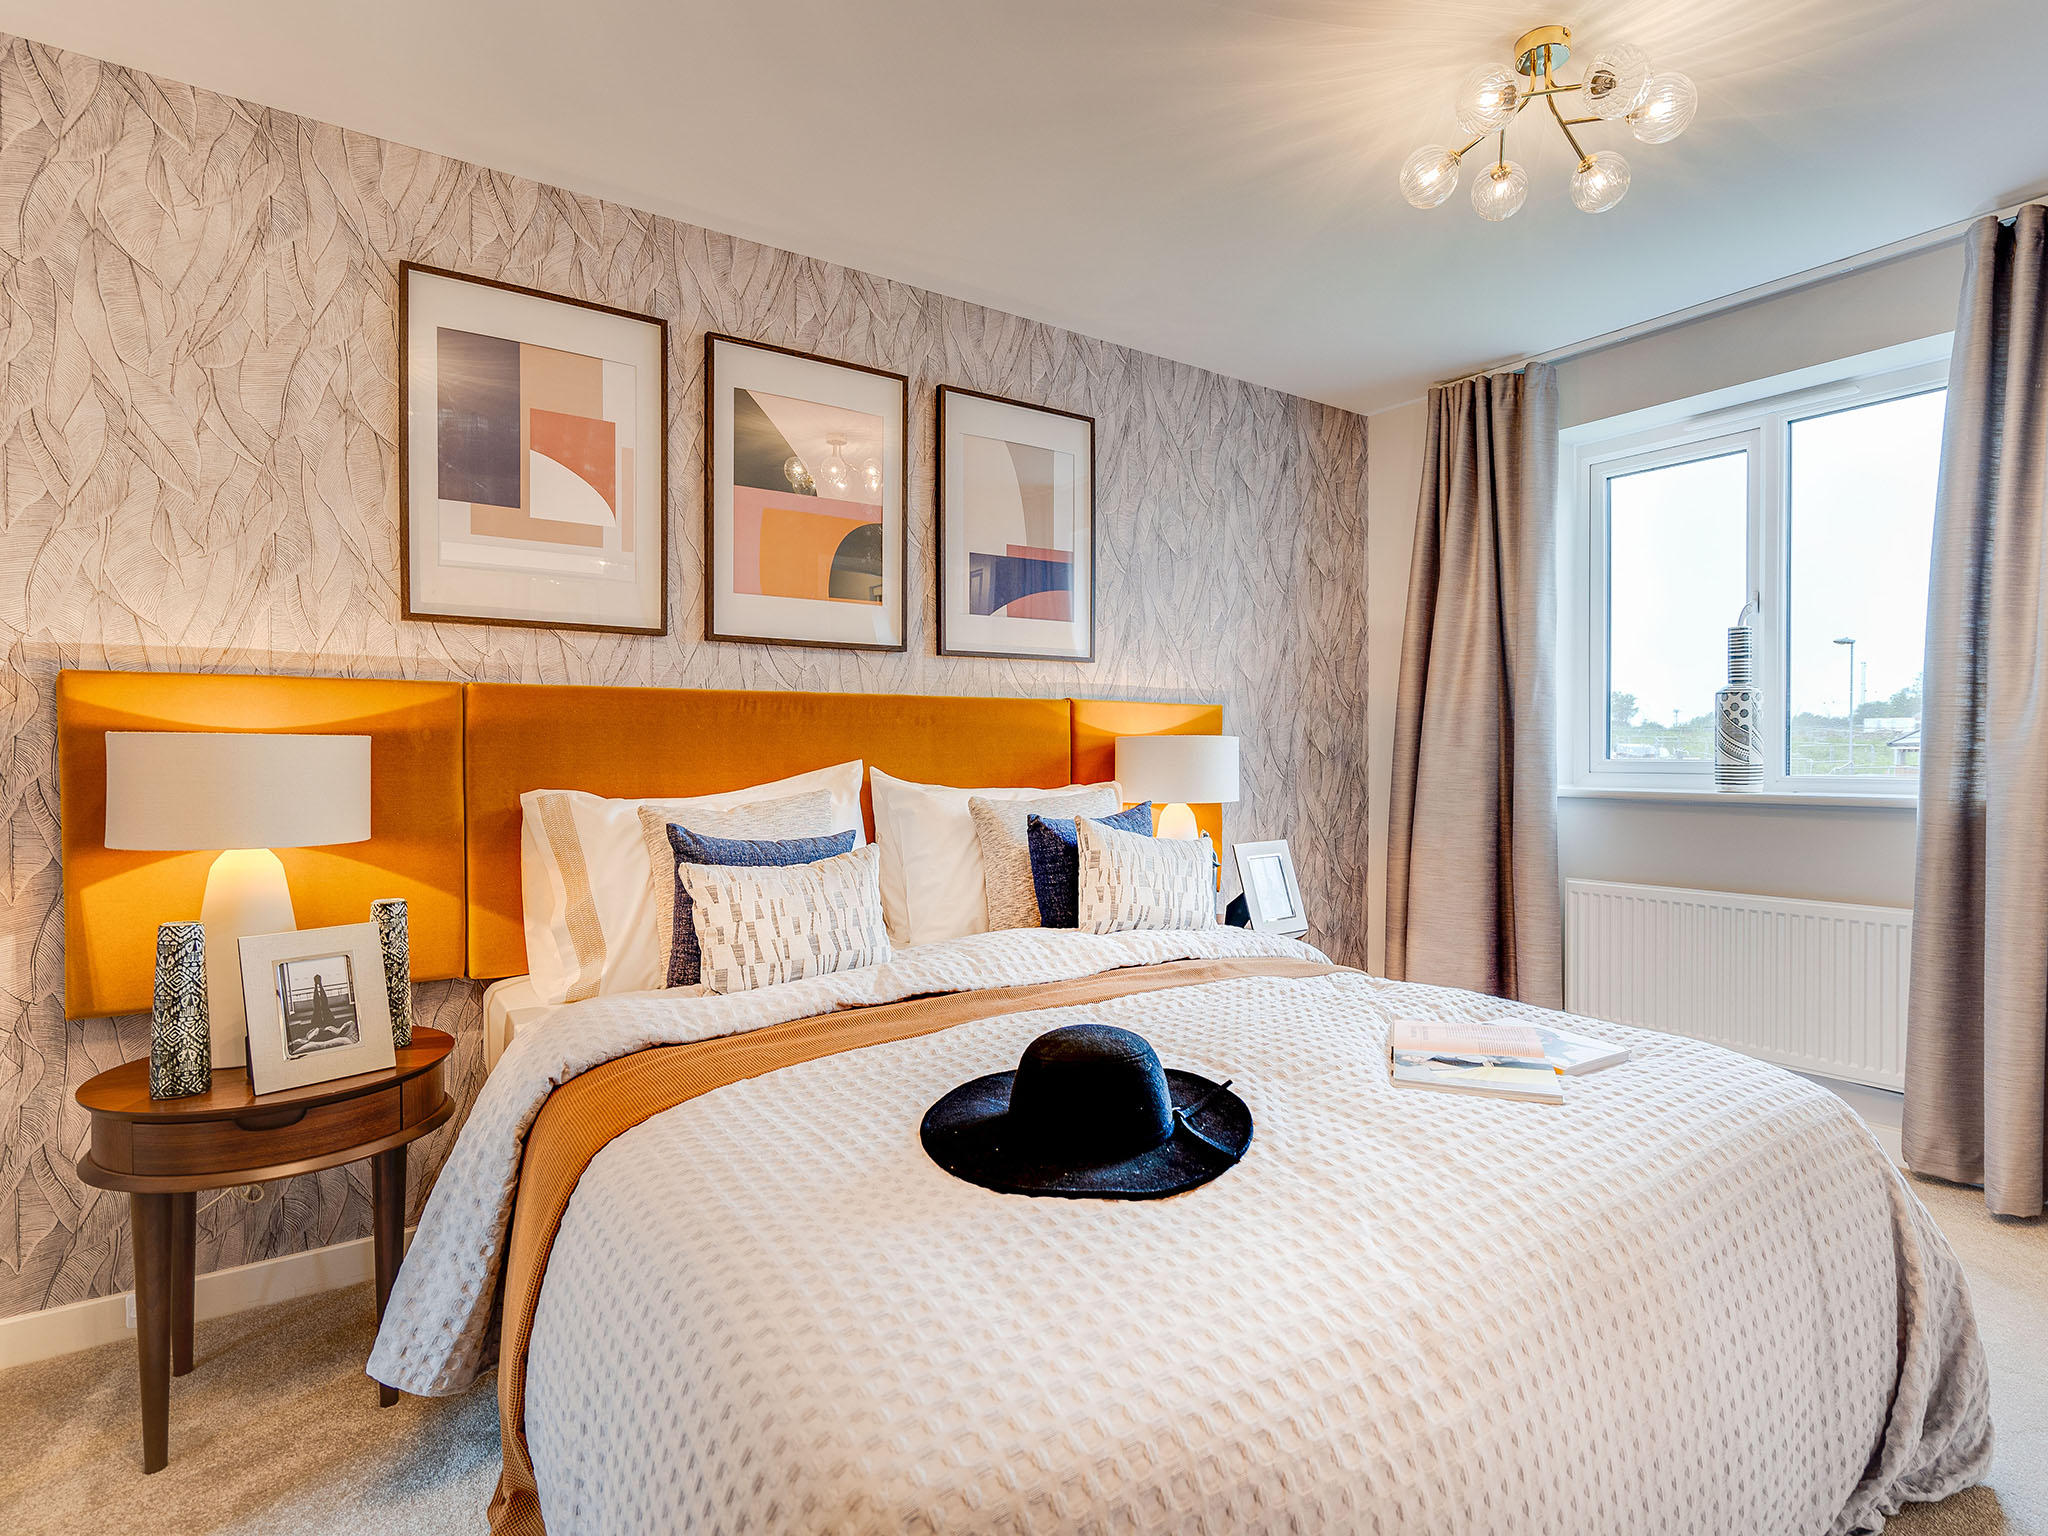 Images Persimmon Homes Fatherford View